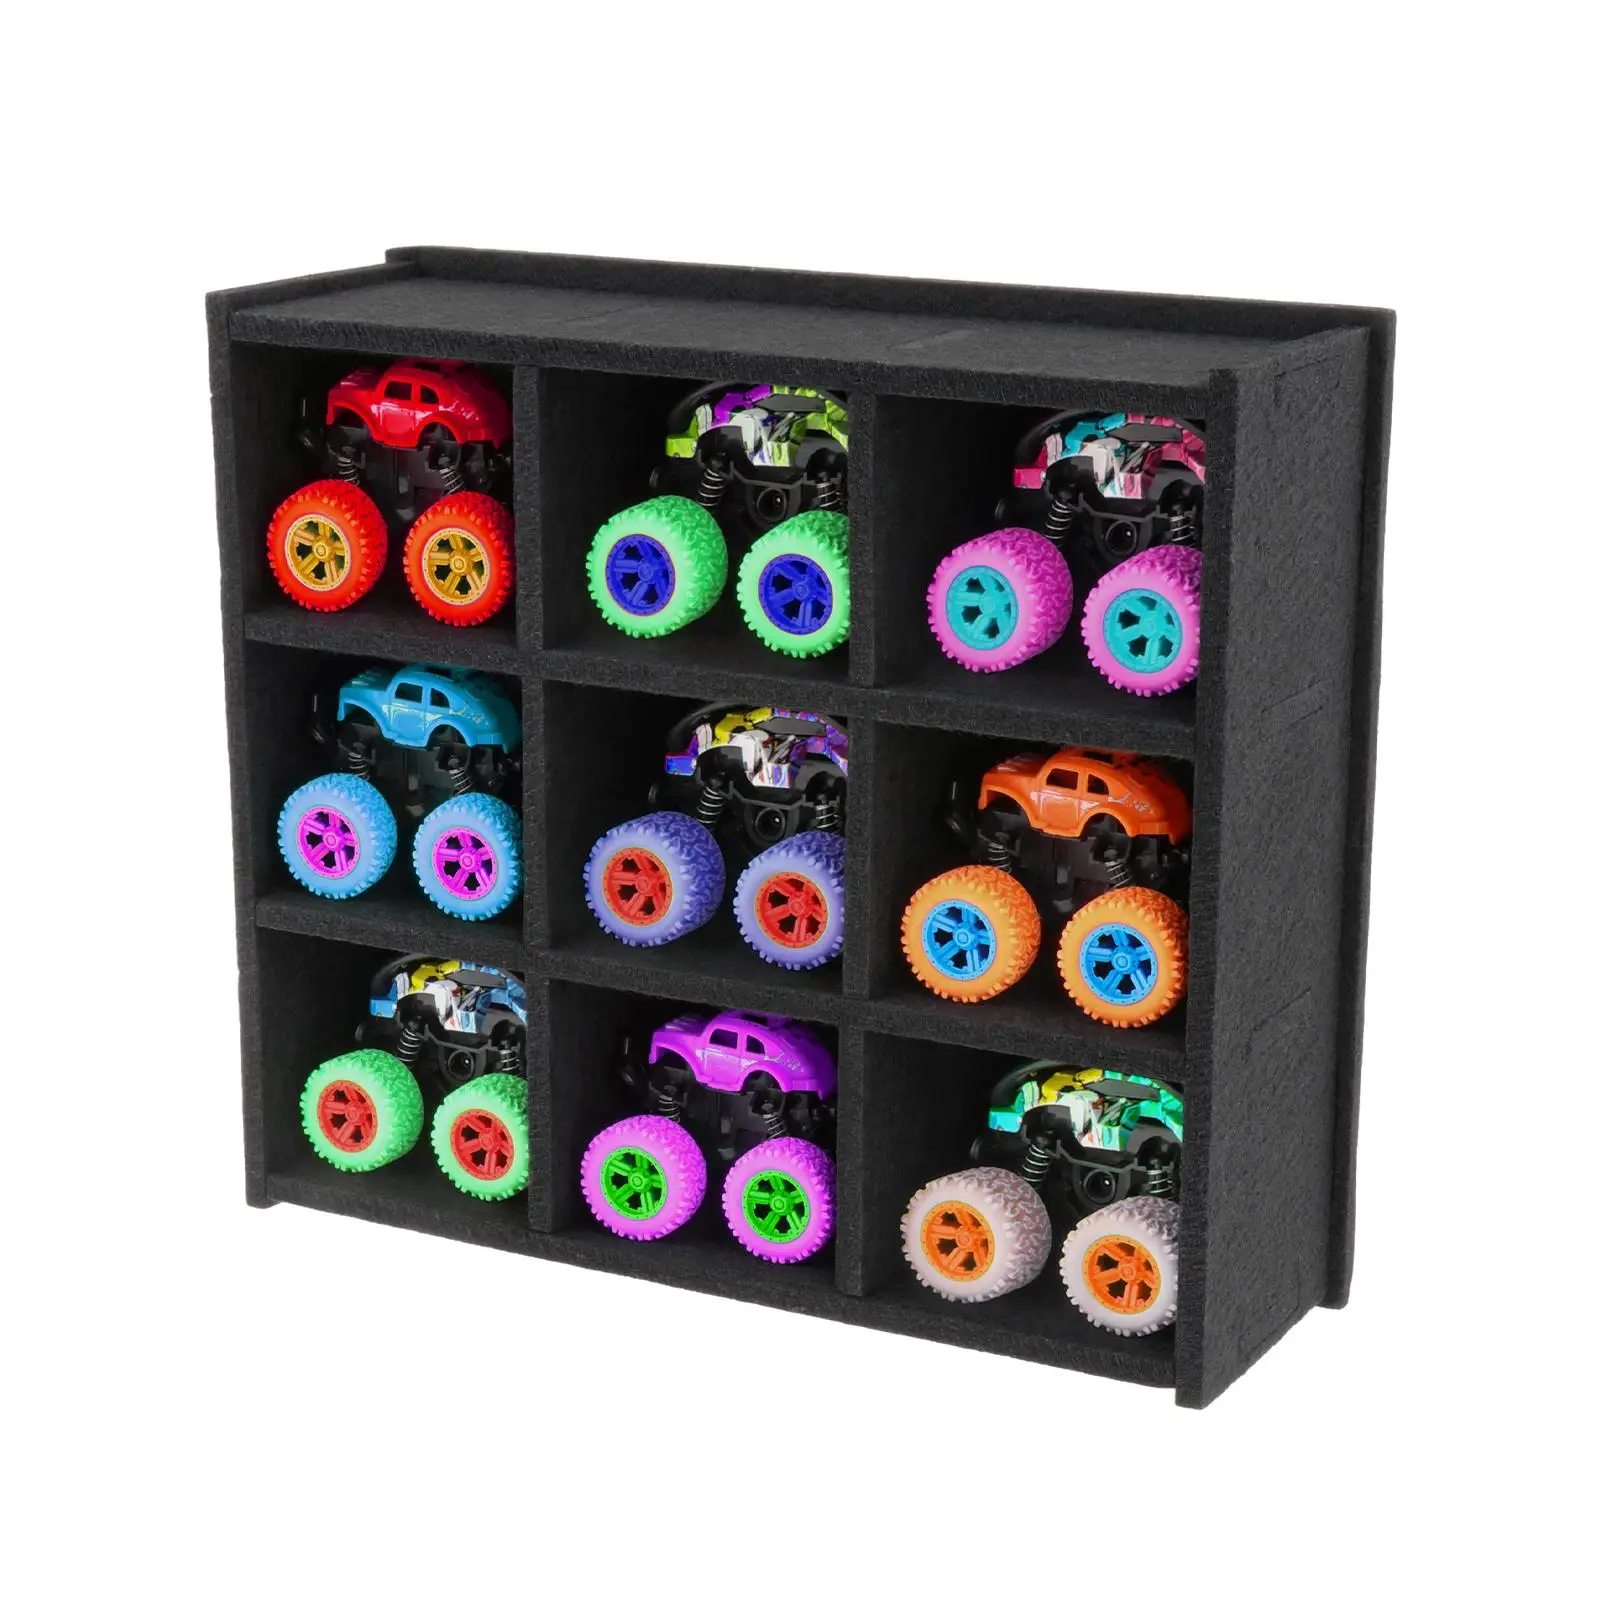 Toy Trucks Door Wall Mounted Storage Case Easily Install Felt Material for Kids to Organize Convenient Multipurpose Accessories